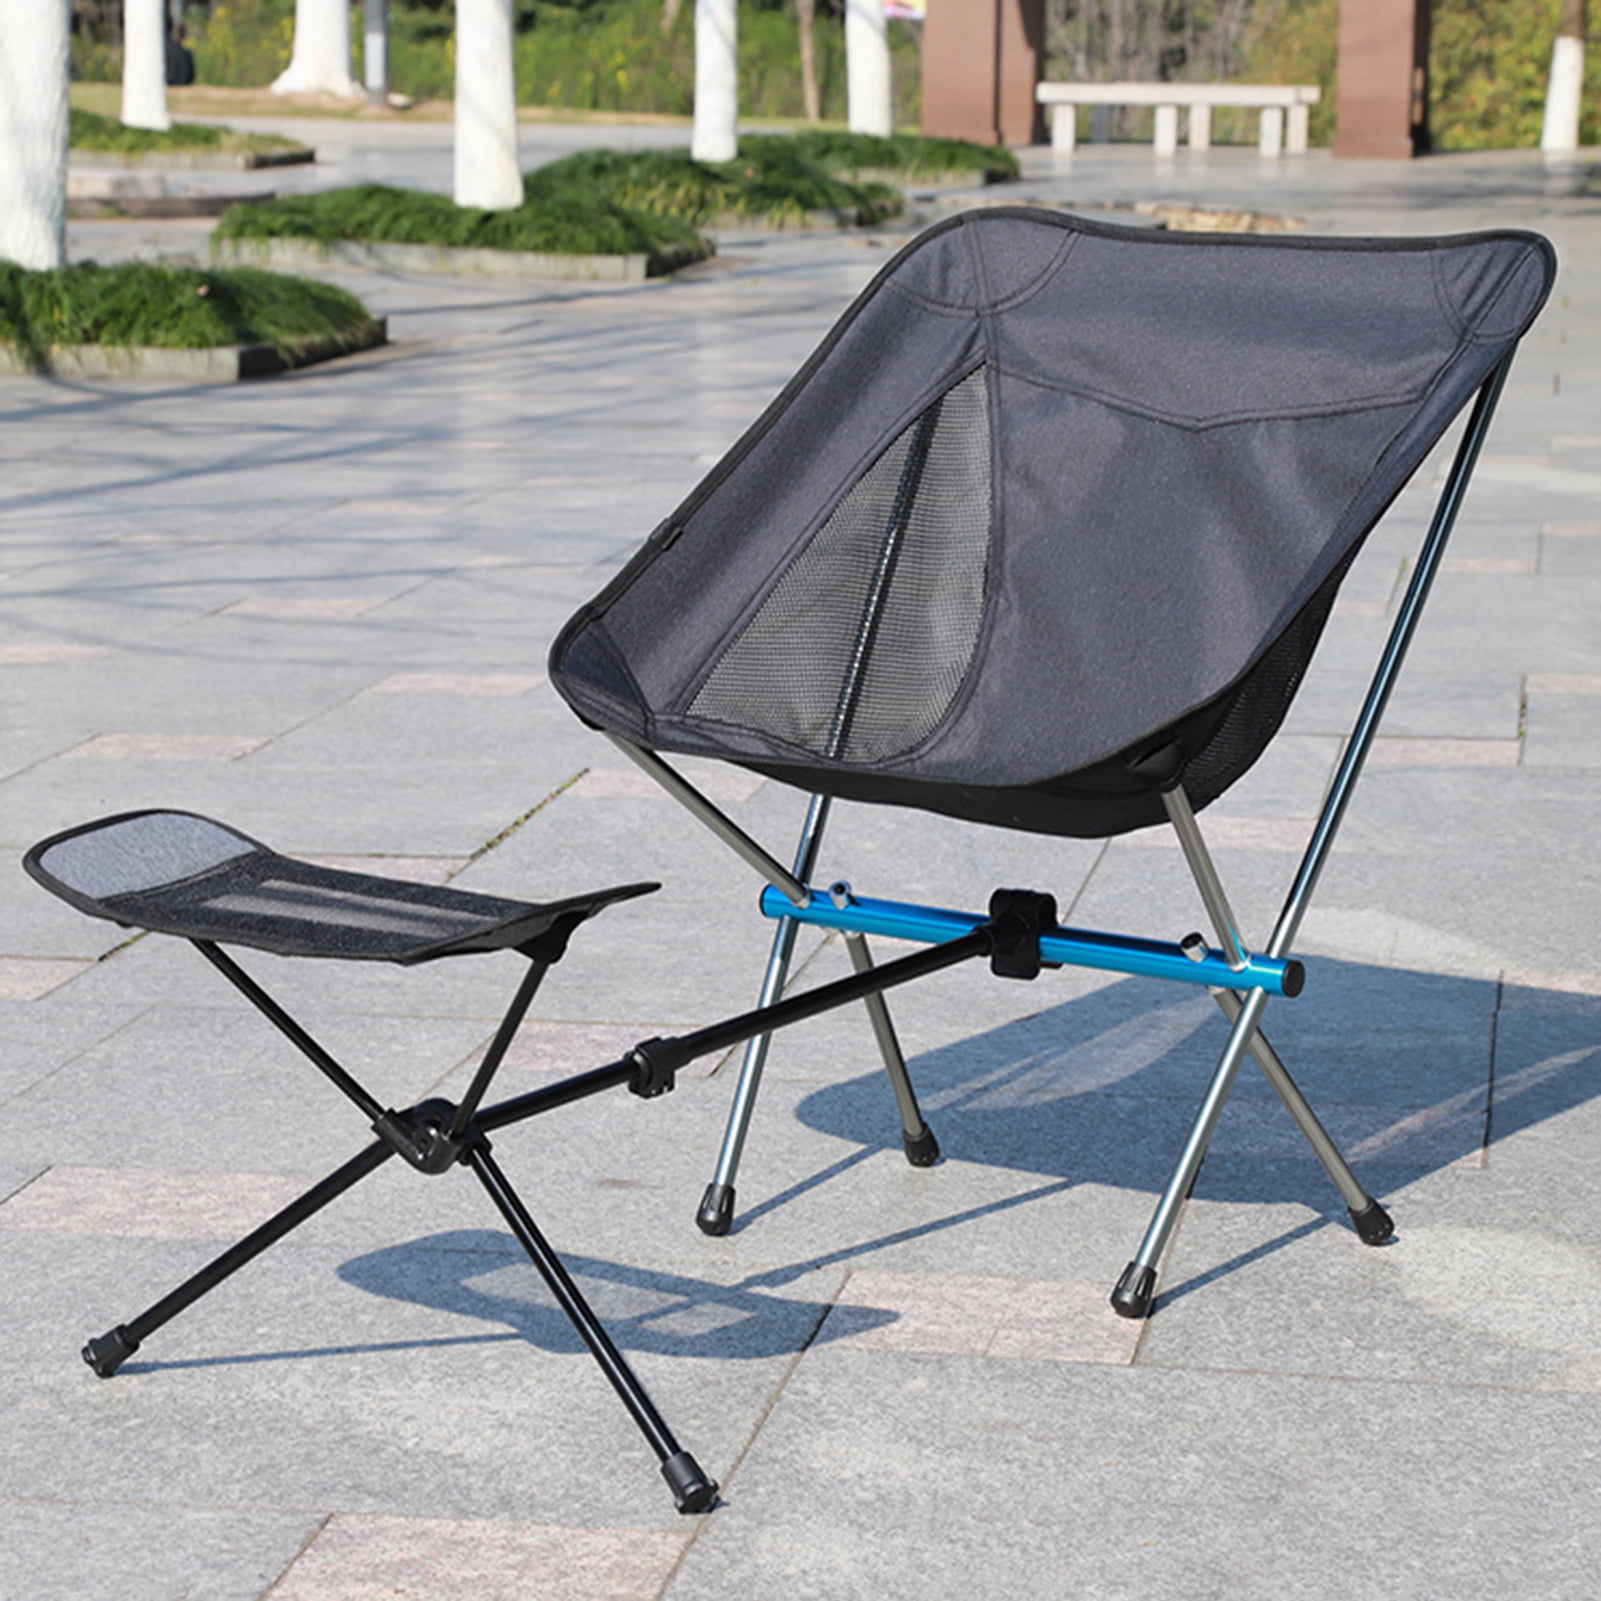 Cdar Outdoor Portable Folding Chair, Portable Chair With Canopy And Footrest